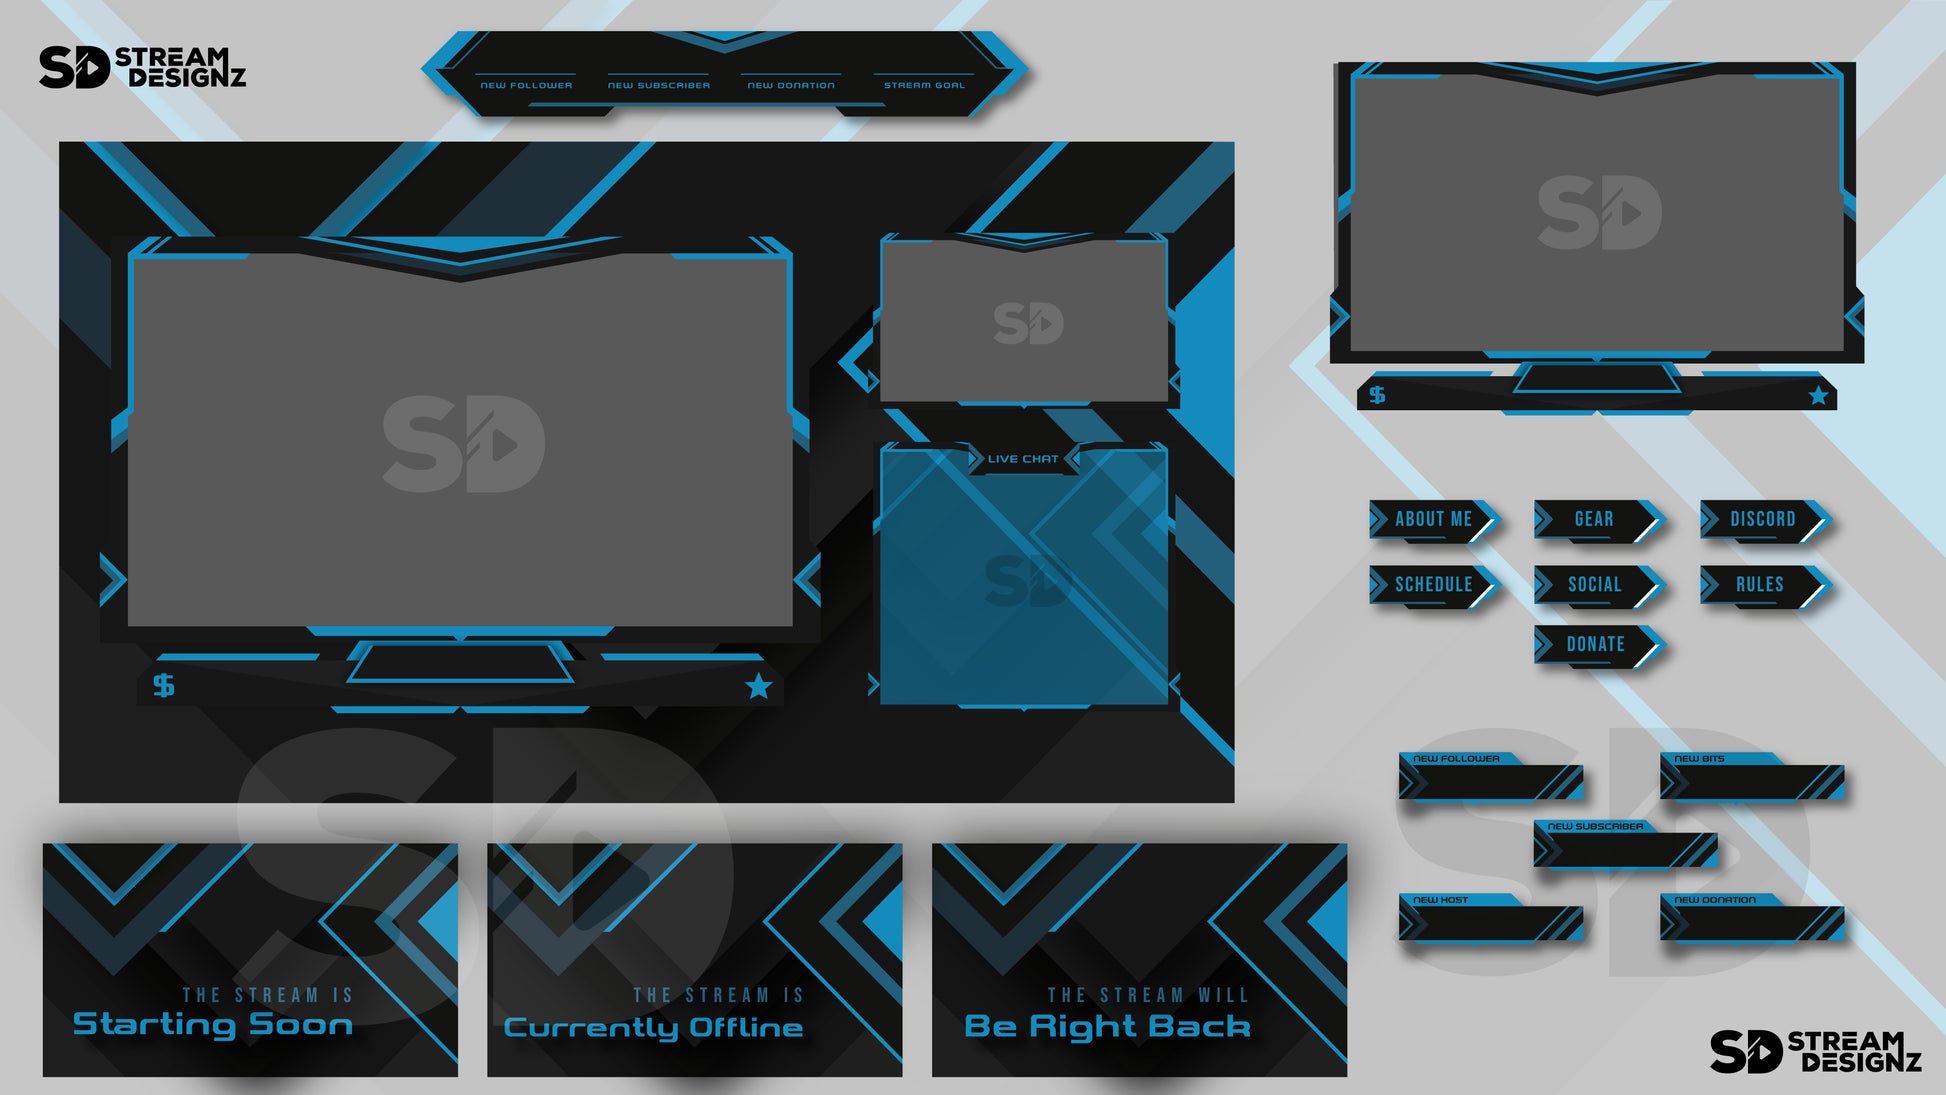 The Ultimate Stream Package - electric - Feature Image - Stream Designz